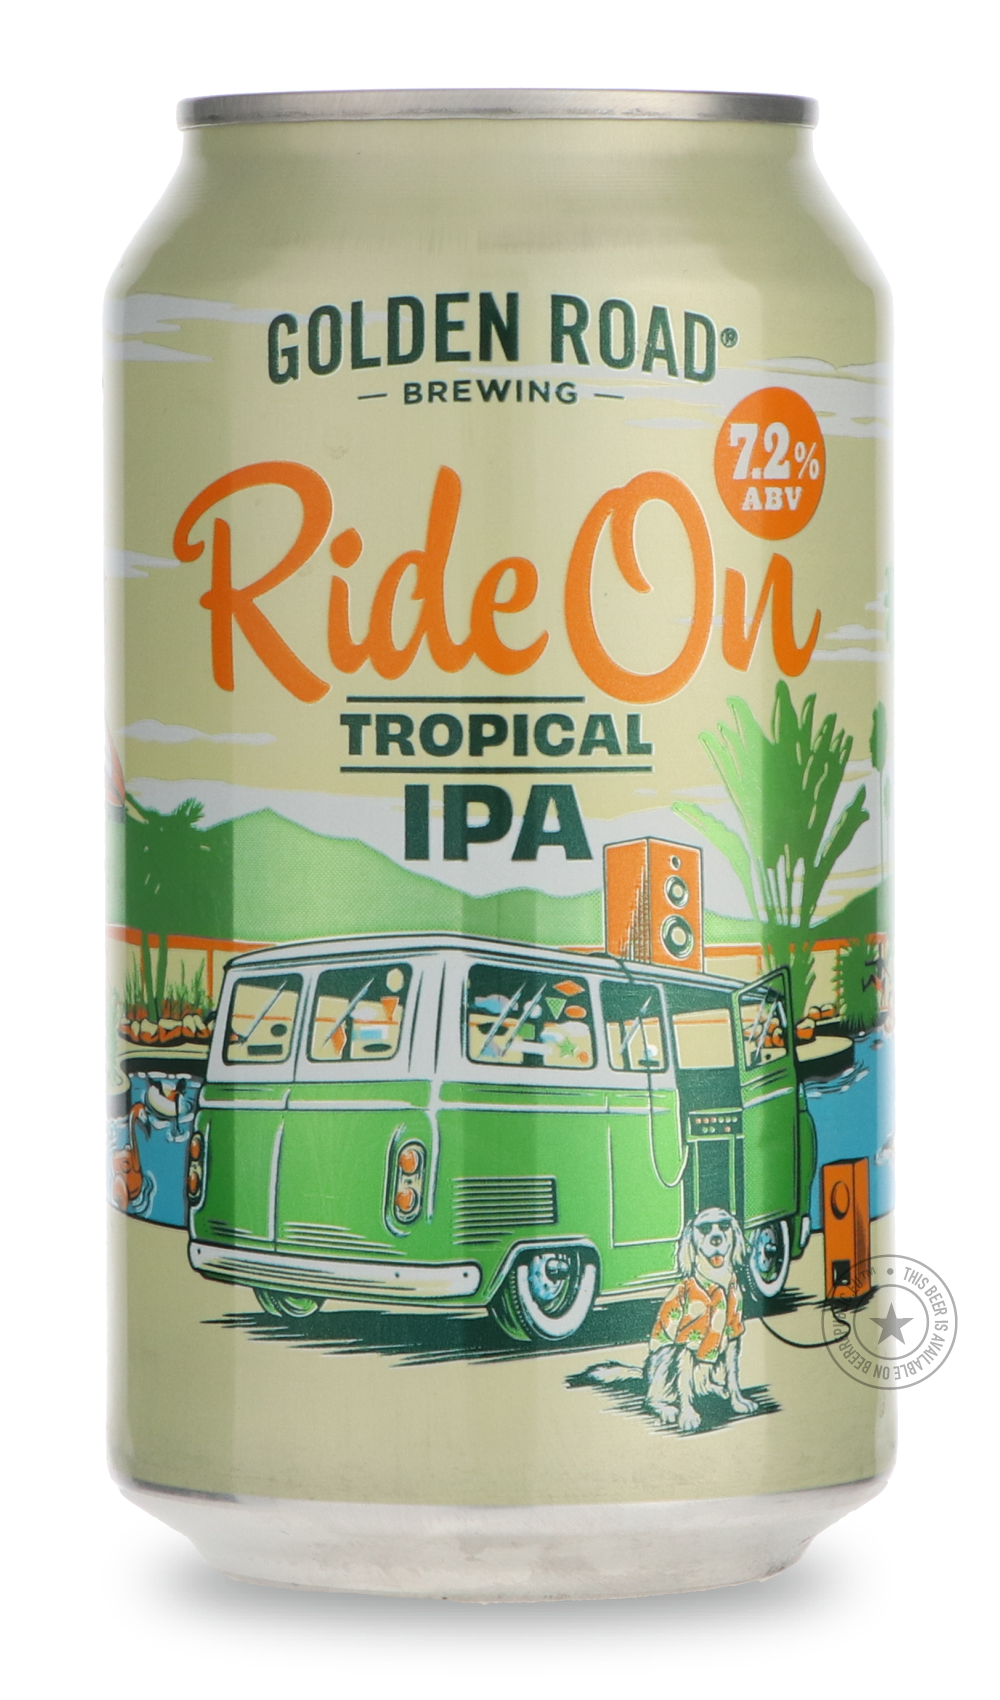 -Golden Road- Ride On Tropical IPA-IPA- Only @ Beer Republic - The best online beer store for American & Canadian craft beer - Buy beer online from the USA and Canada - Bier online kopen - Amerikaans bier kopen - Craft beer store - Craft beer kopen - Amerikanisch bier kaufen - Bier online kaufen - Acheter biere online - IPA - Stout - Porter - New England IPA - Hazy IPA - Imperial Stout - Barrel Aged - Barrel Aged Imperial Stout - Brown - Dark beer - Blond - Blonde - Pilsner - Lager - Wheat - Weizen - Amber 